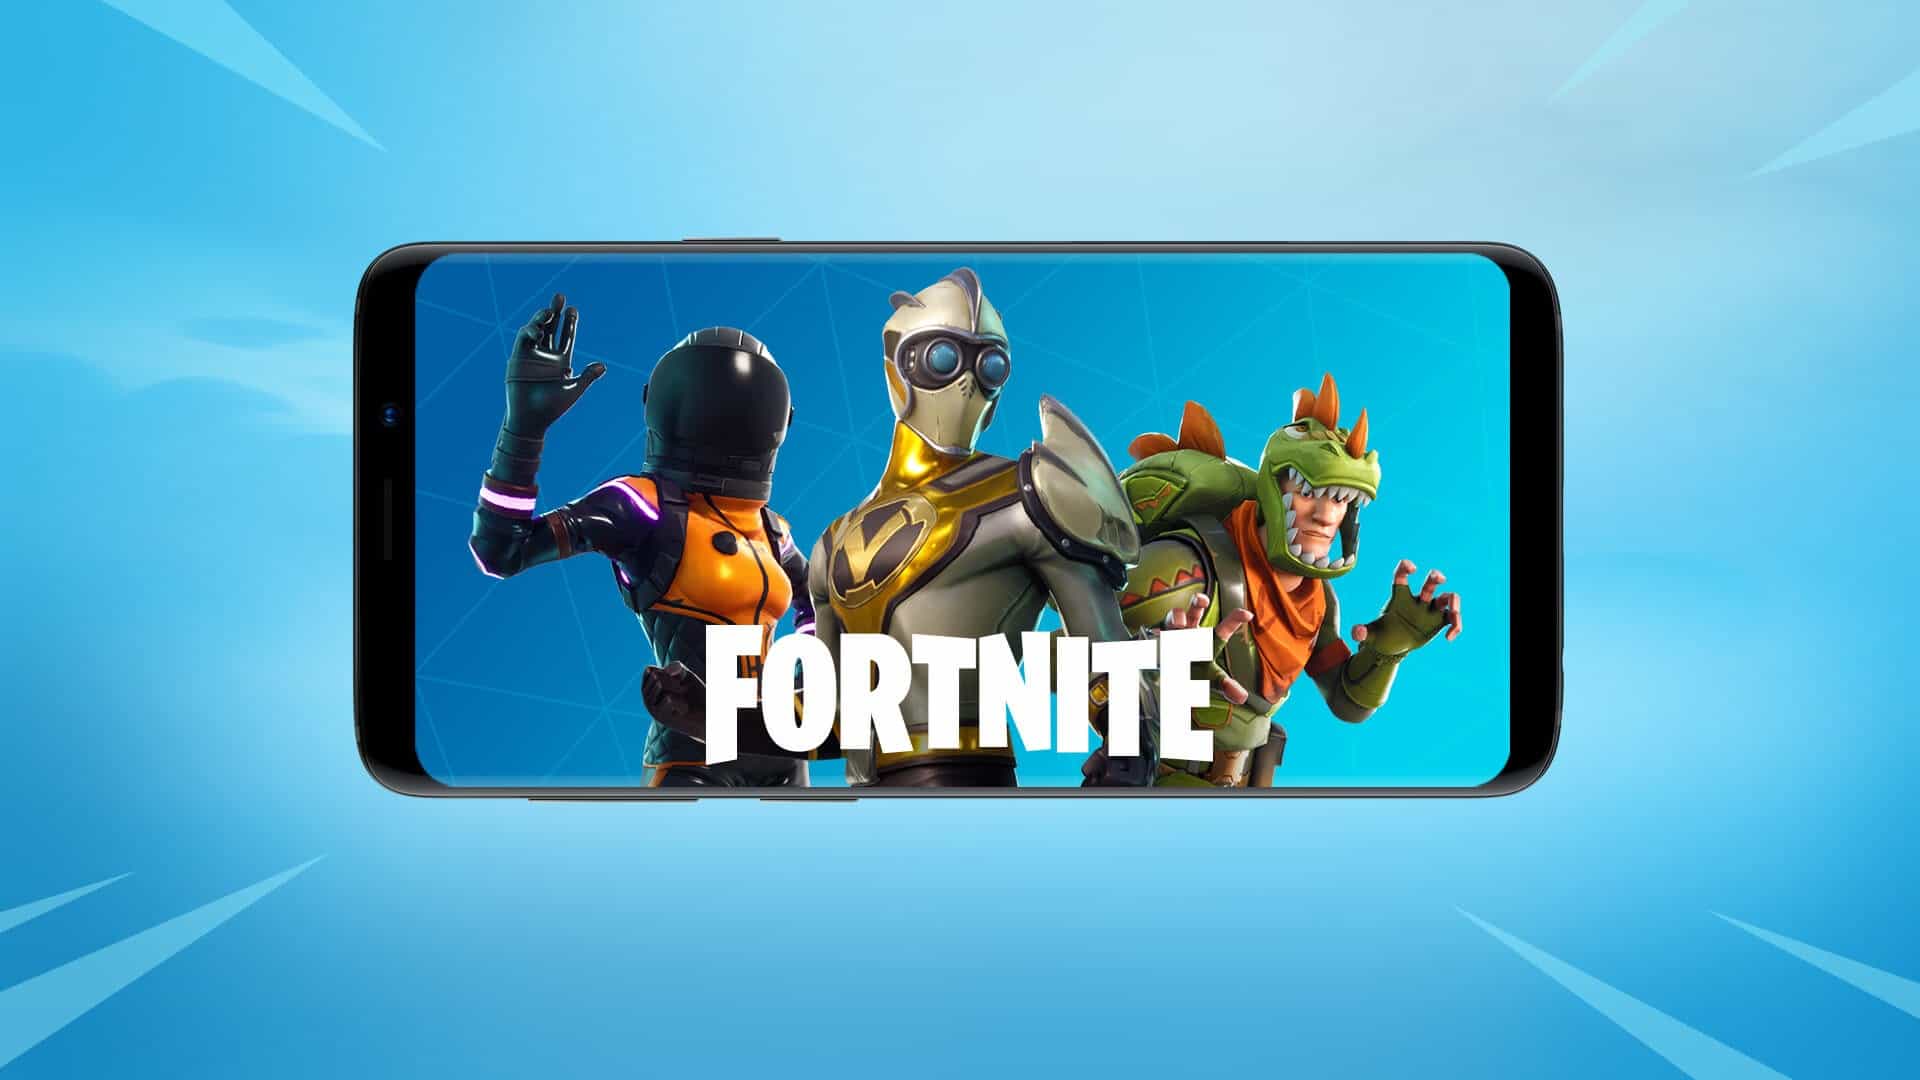 Best online multiplayer games for Android in 2020